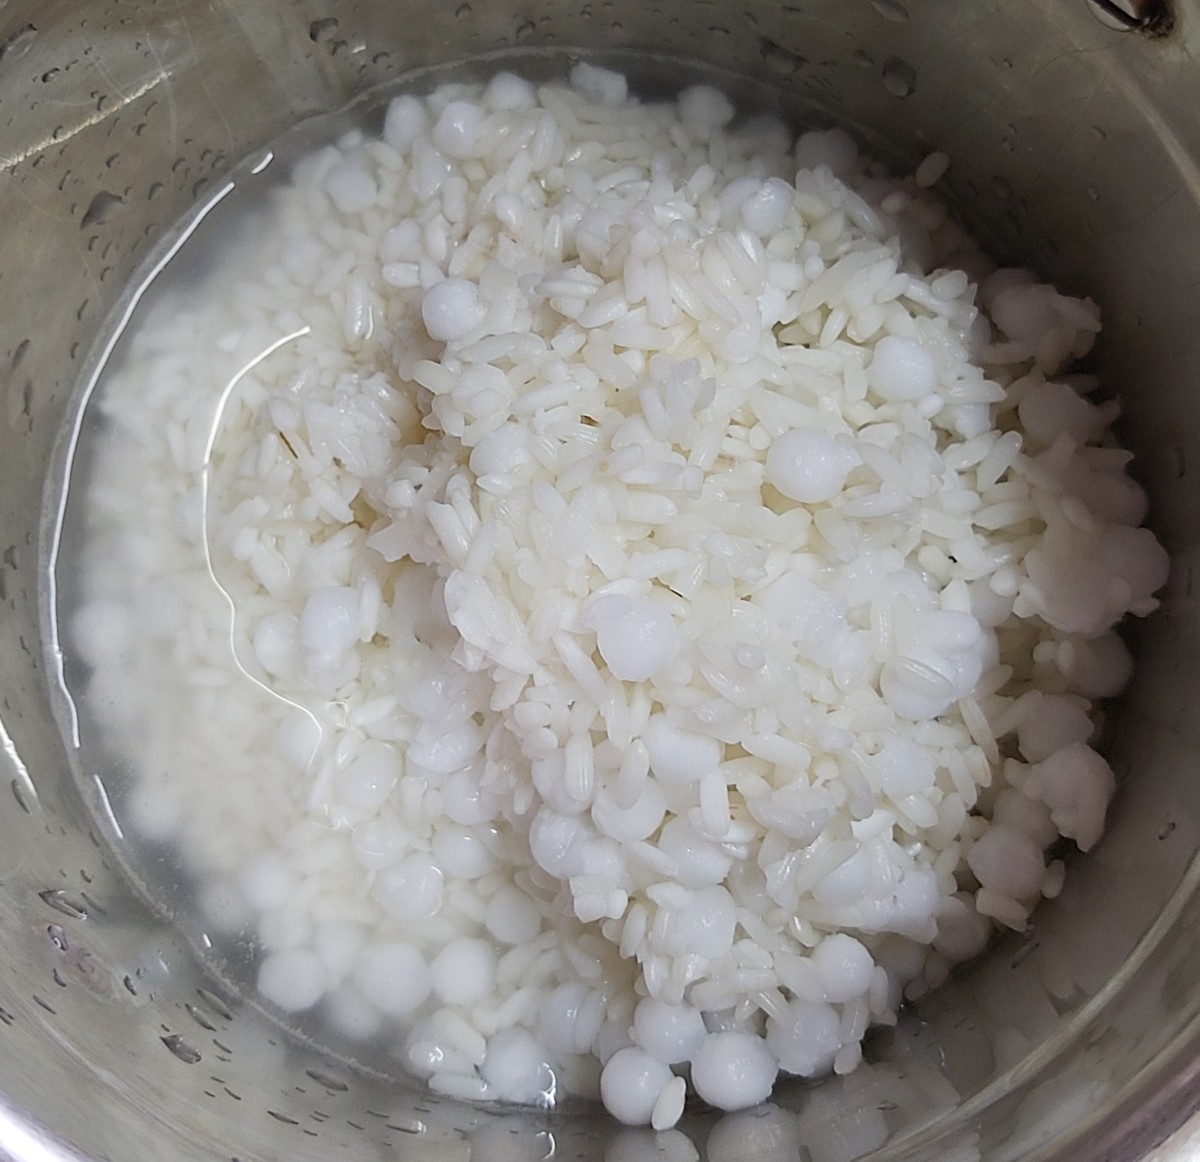 Transfer this mixture to a mixer jar along with enough water to grind (you can use sabudana-rice soaked water only). But don't add too much water as it can make the batter too watery.